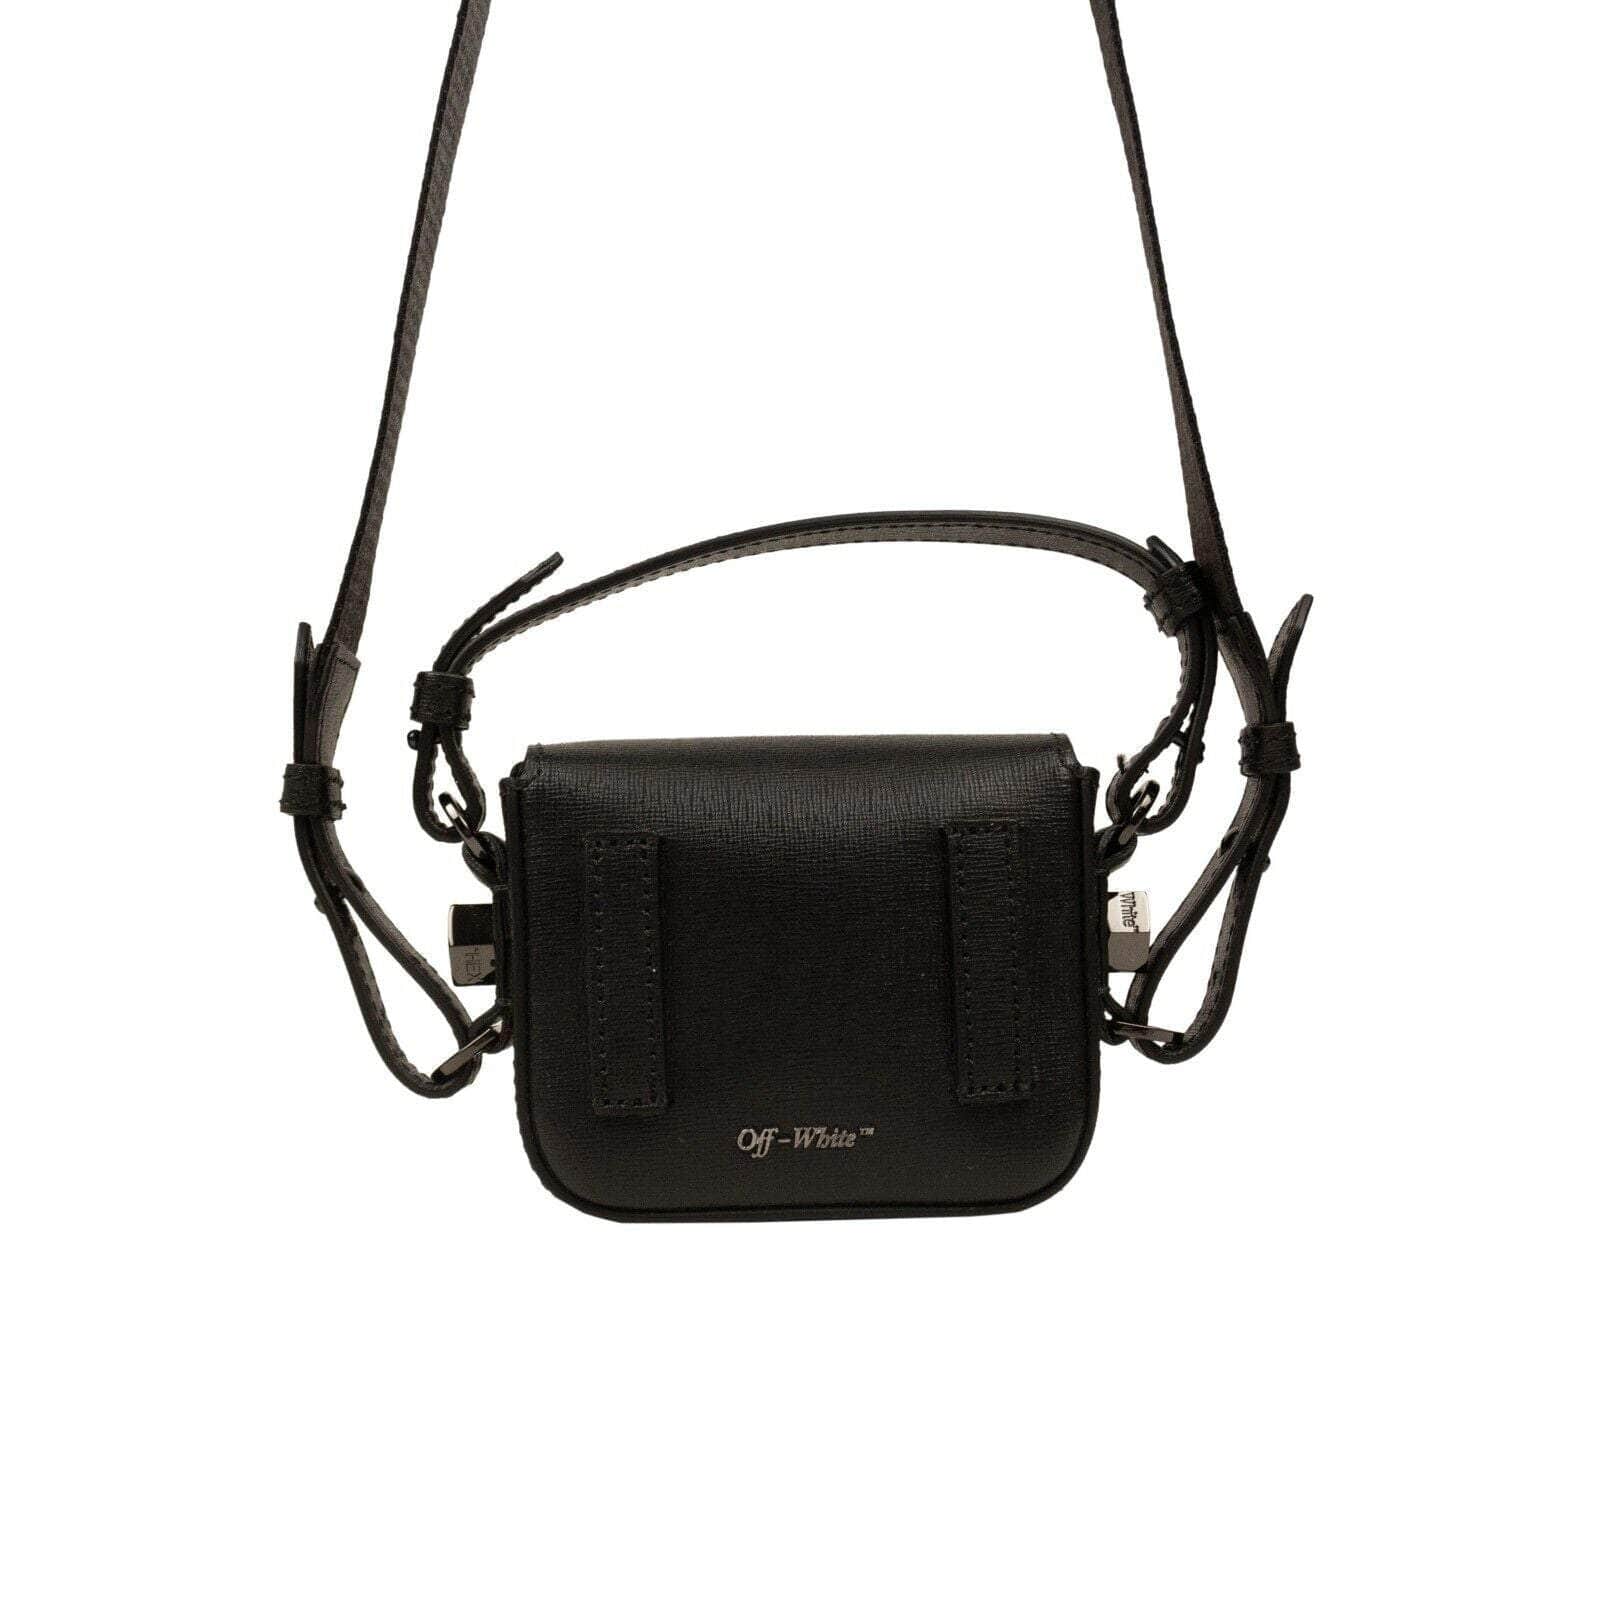 OFF-WHITE c/o VIRGIL ABLOH 500-750, couponcollection, gender-womens, main-handbags, off-white-c-o-virgil-abloh, size-os, womens-crossbody-bags OS Black Baby Flap Crossbody Bag OFW-XBGS-0027/OS OFW-XBGS-0027/OS